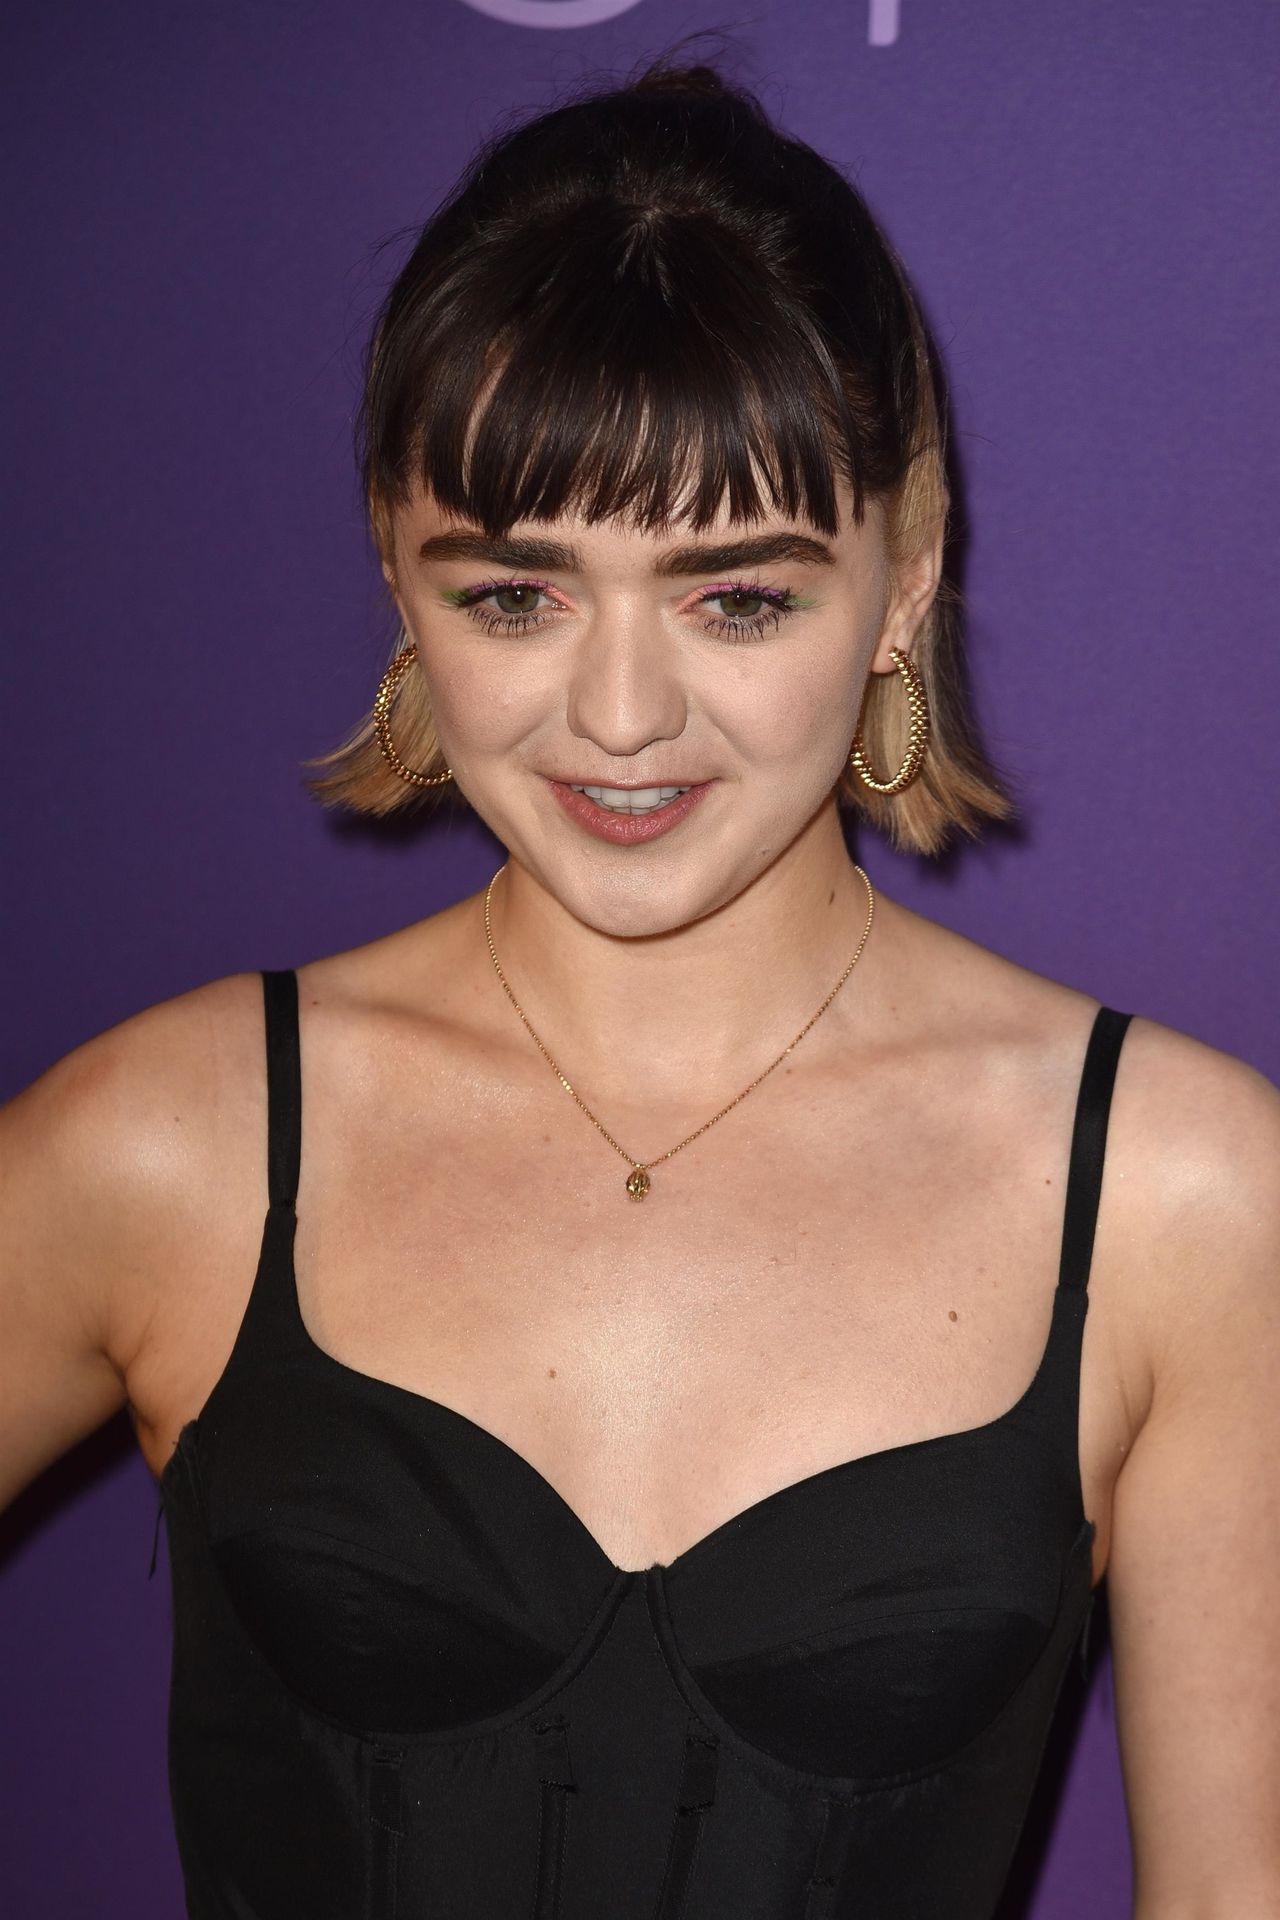 Maisie Williams Pictured Attending the Sky Up Next Event (17 Photos)